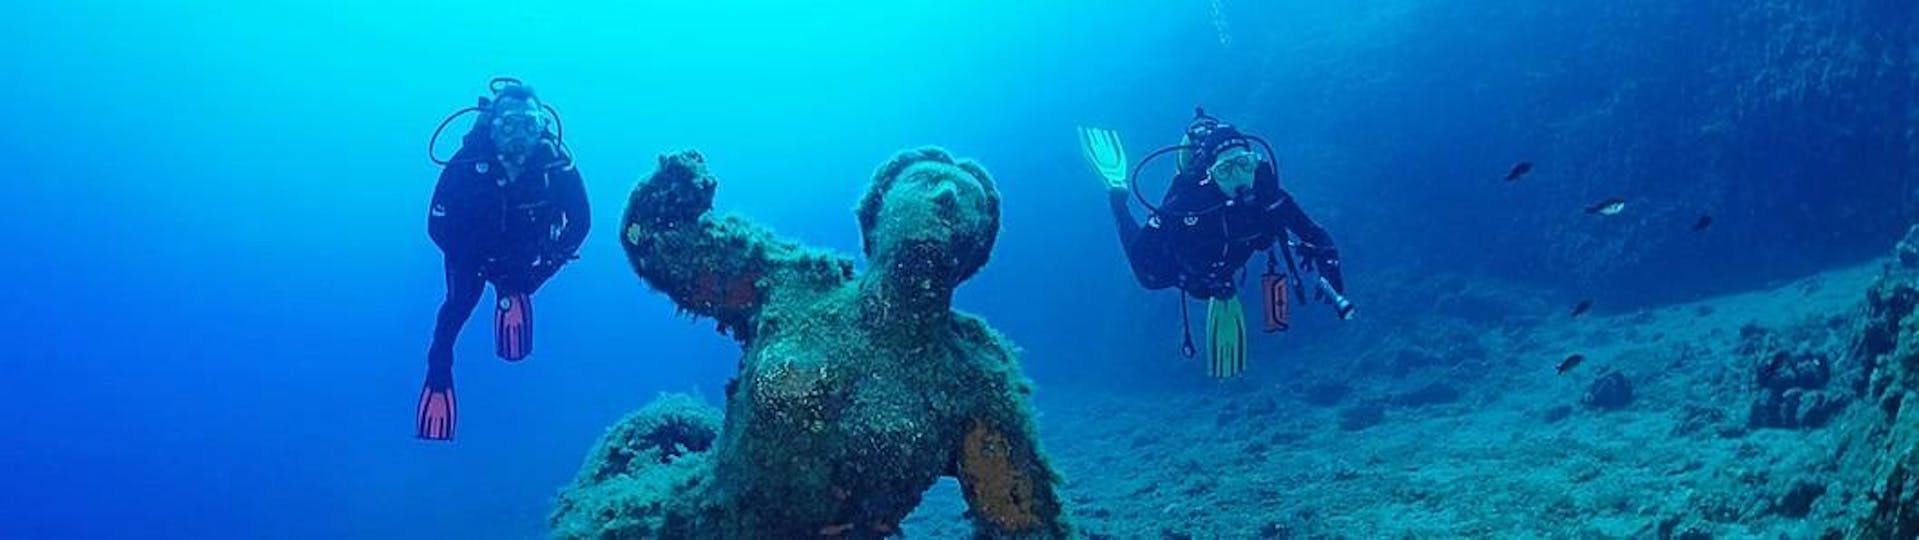 A beginner diver and his instructor discover the underwater scenery during the first dive at Lion de Mer with Aventure Sous-Marine Saint-Raphaël.